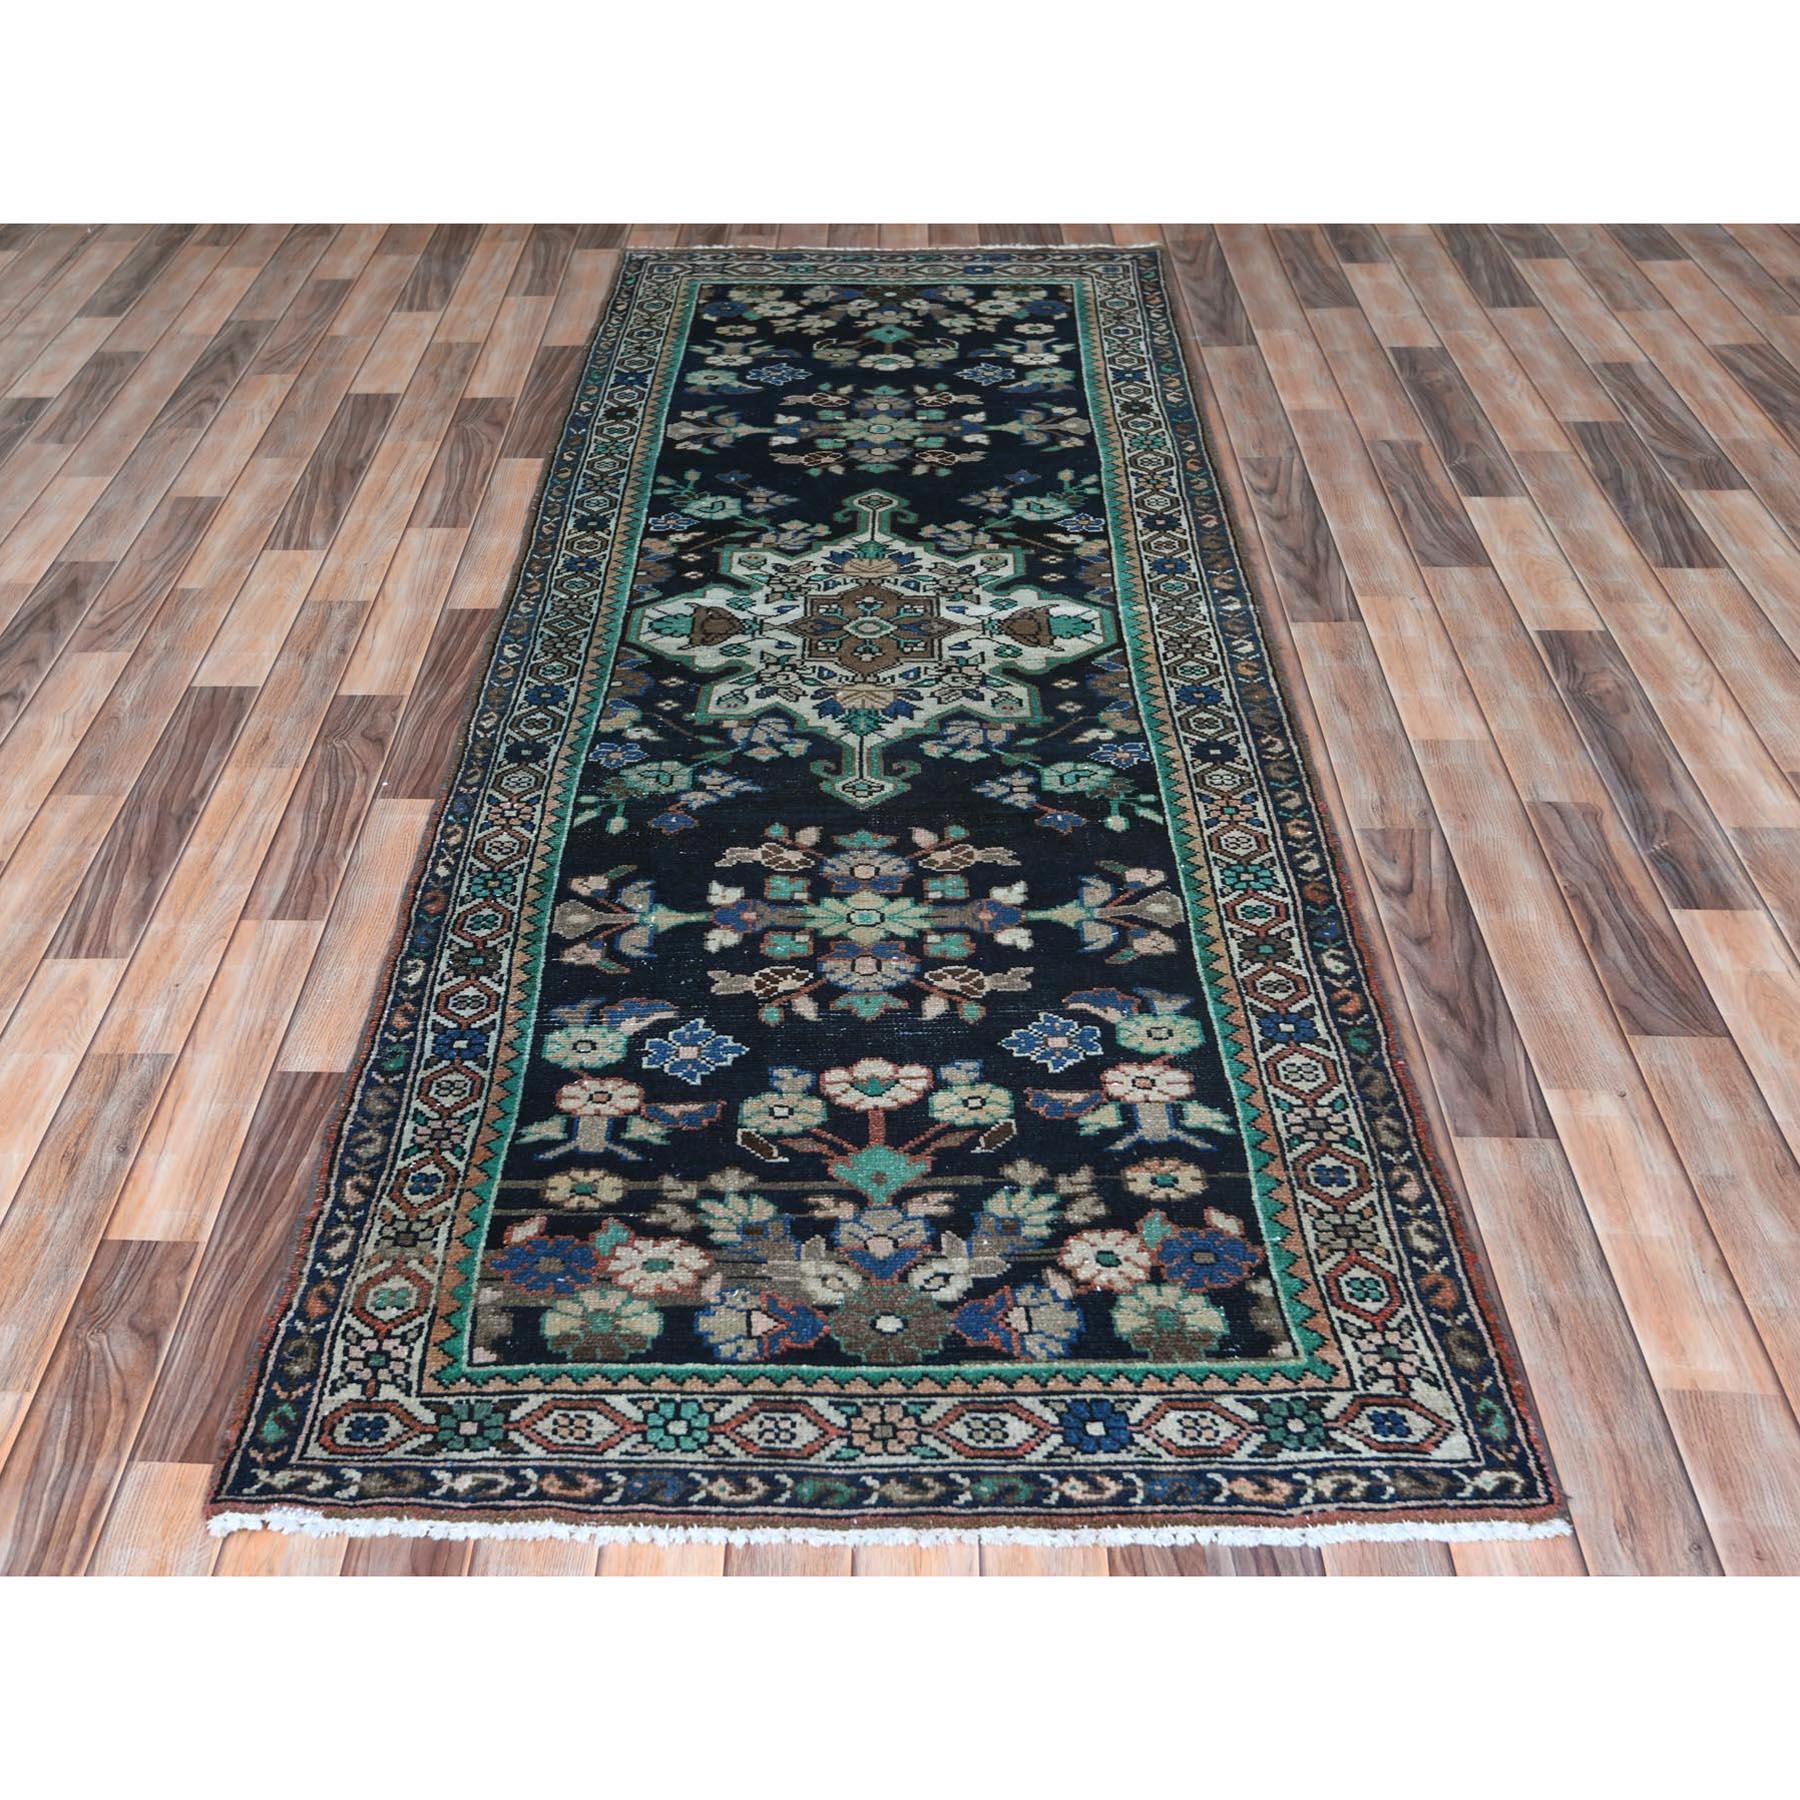 This fabulous hand-knotted carpet has been created and designed for extra strength and durability. This rug has been handcrafted for weeks in the traditional method that is used to make
Exact Rug Size in Feet and Inches : 3'4